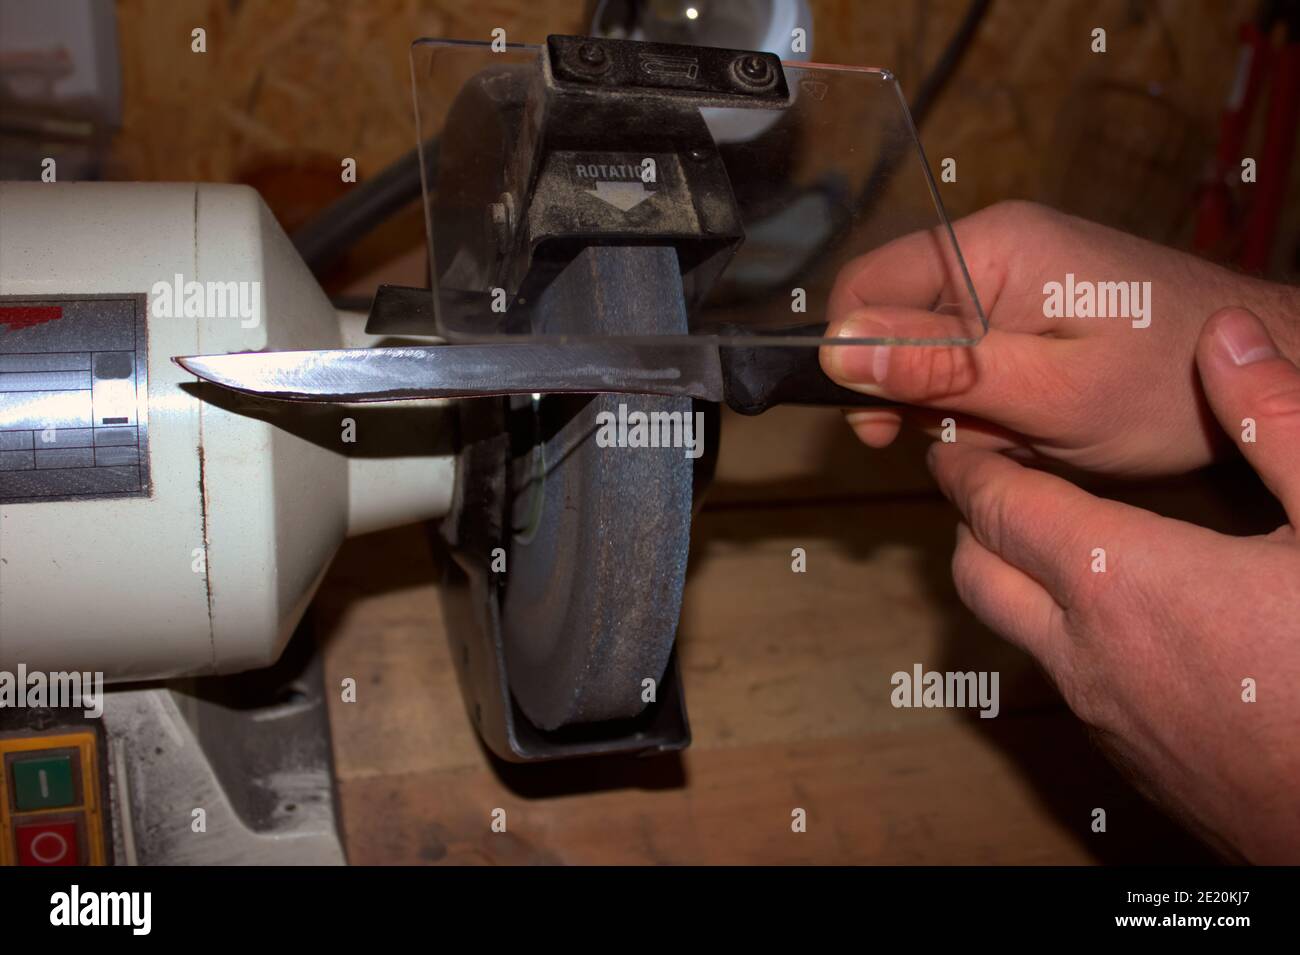 Grindstone Close-up. Electric Knife Sharpening Machine Stock Image - Image  of equipment, industrial: 223006419